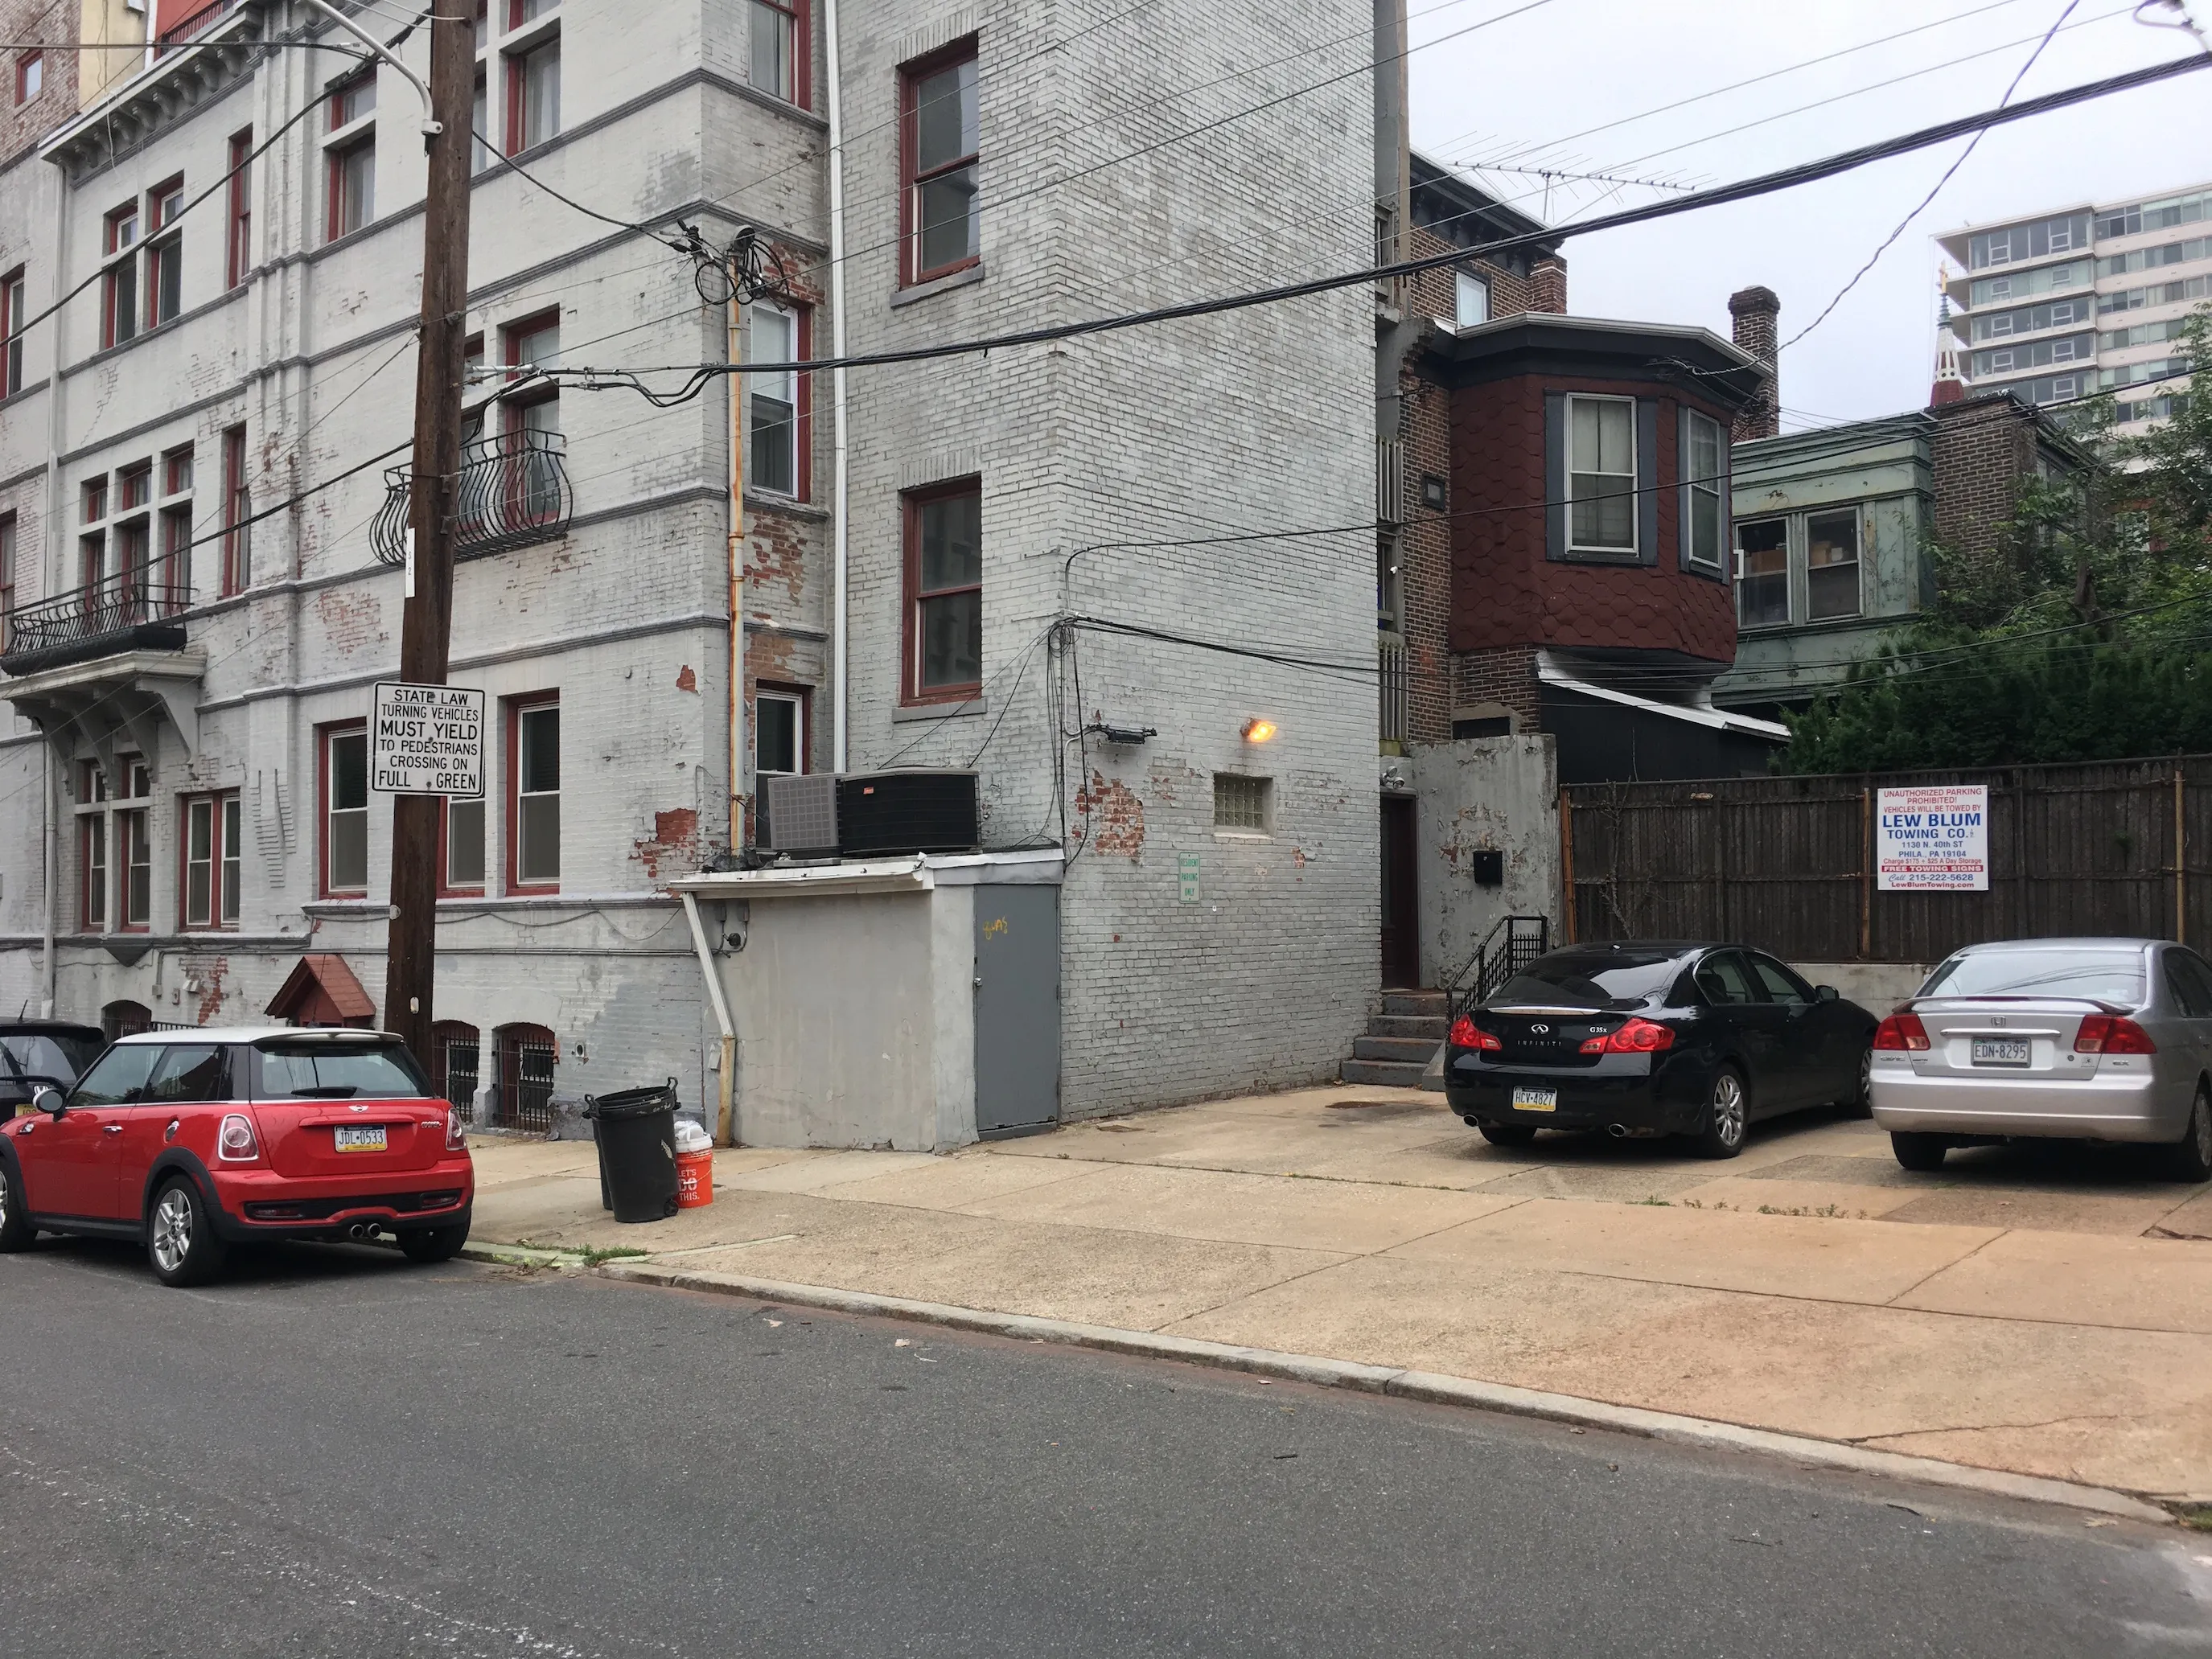 Parking, Garages And Car Spaces For Rent - Fairmount/art Museum Off Street Parking Space(s)!